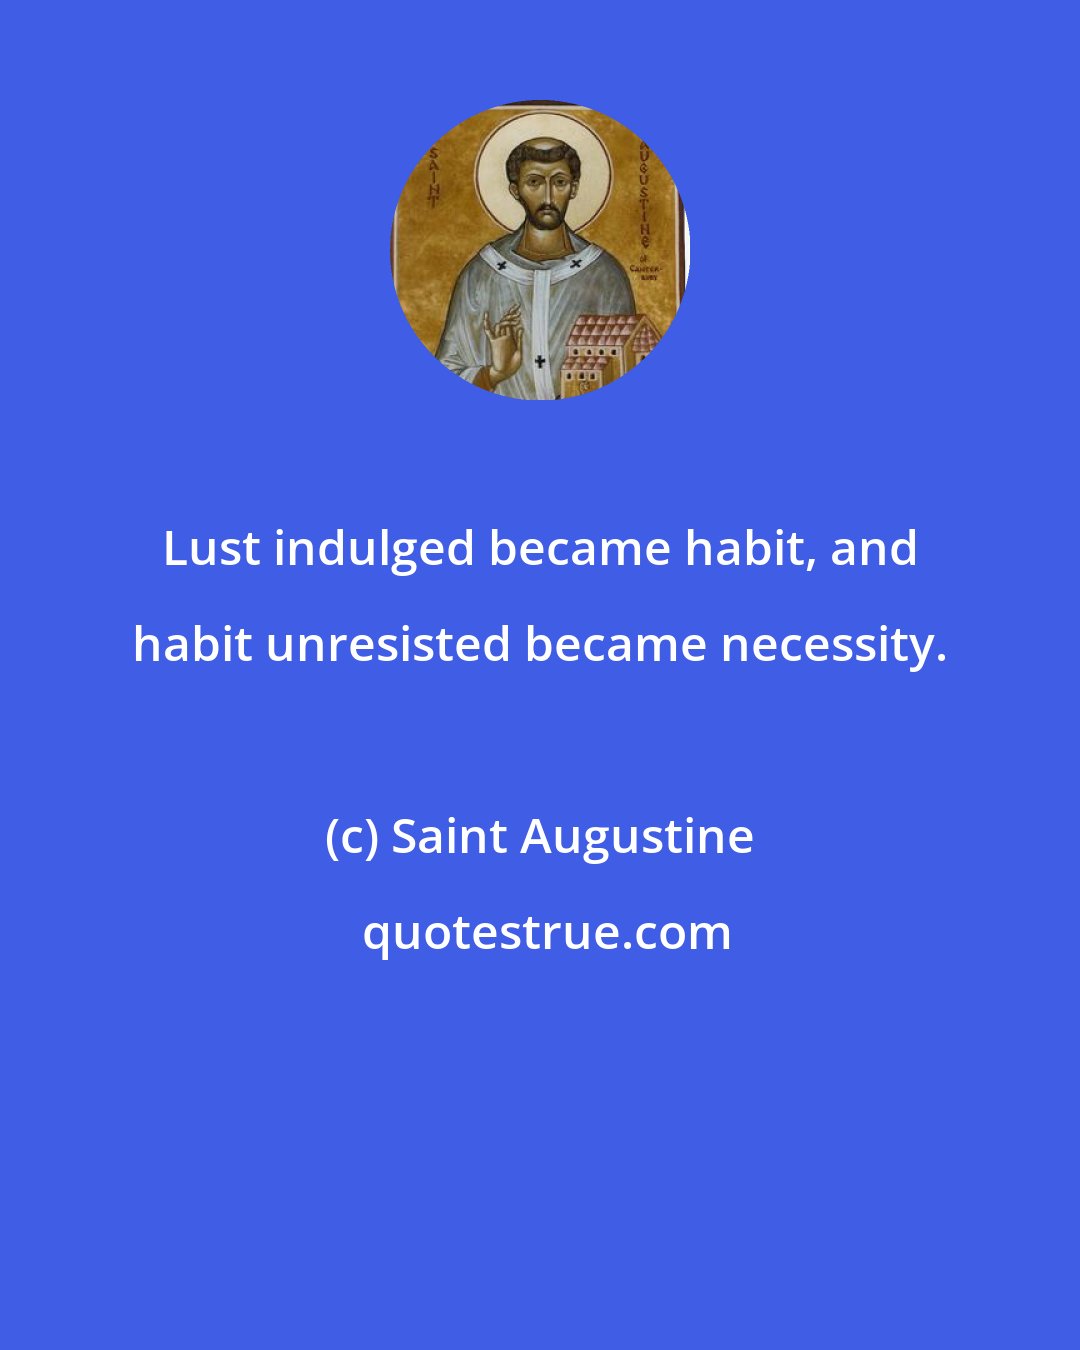 Saint Augustine: Lust indulged became habit, and habit unresisted became necessity.